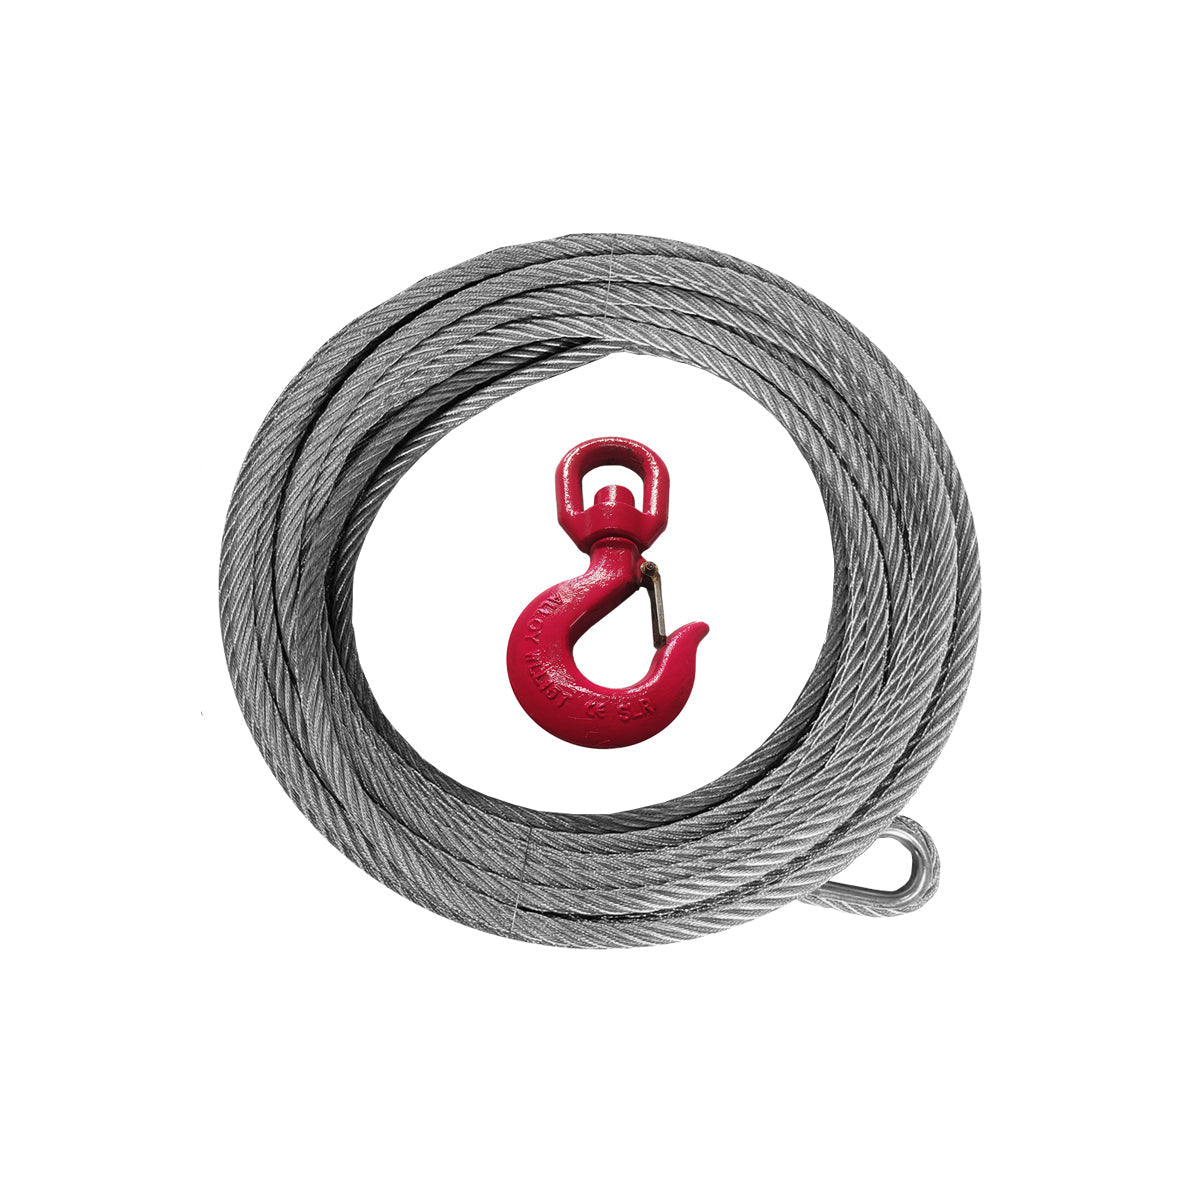 1.26"×147' Steel Cable with Hook